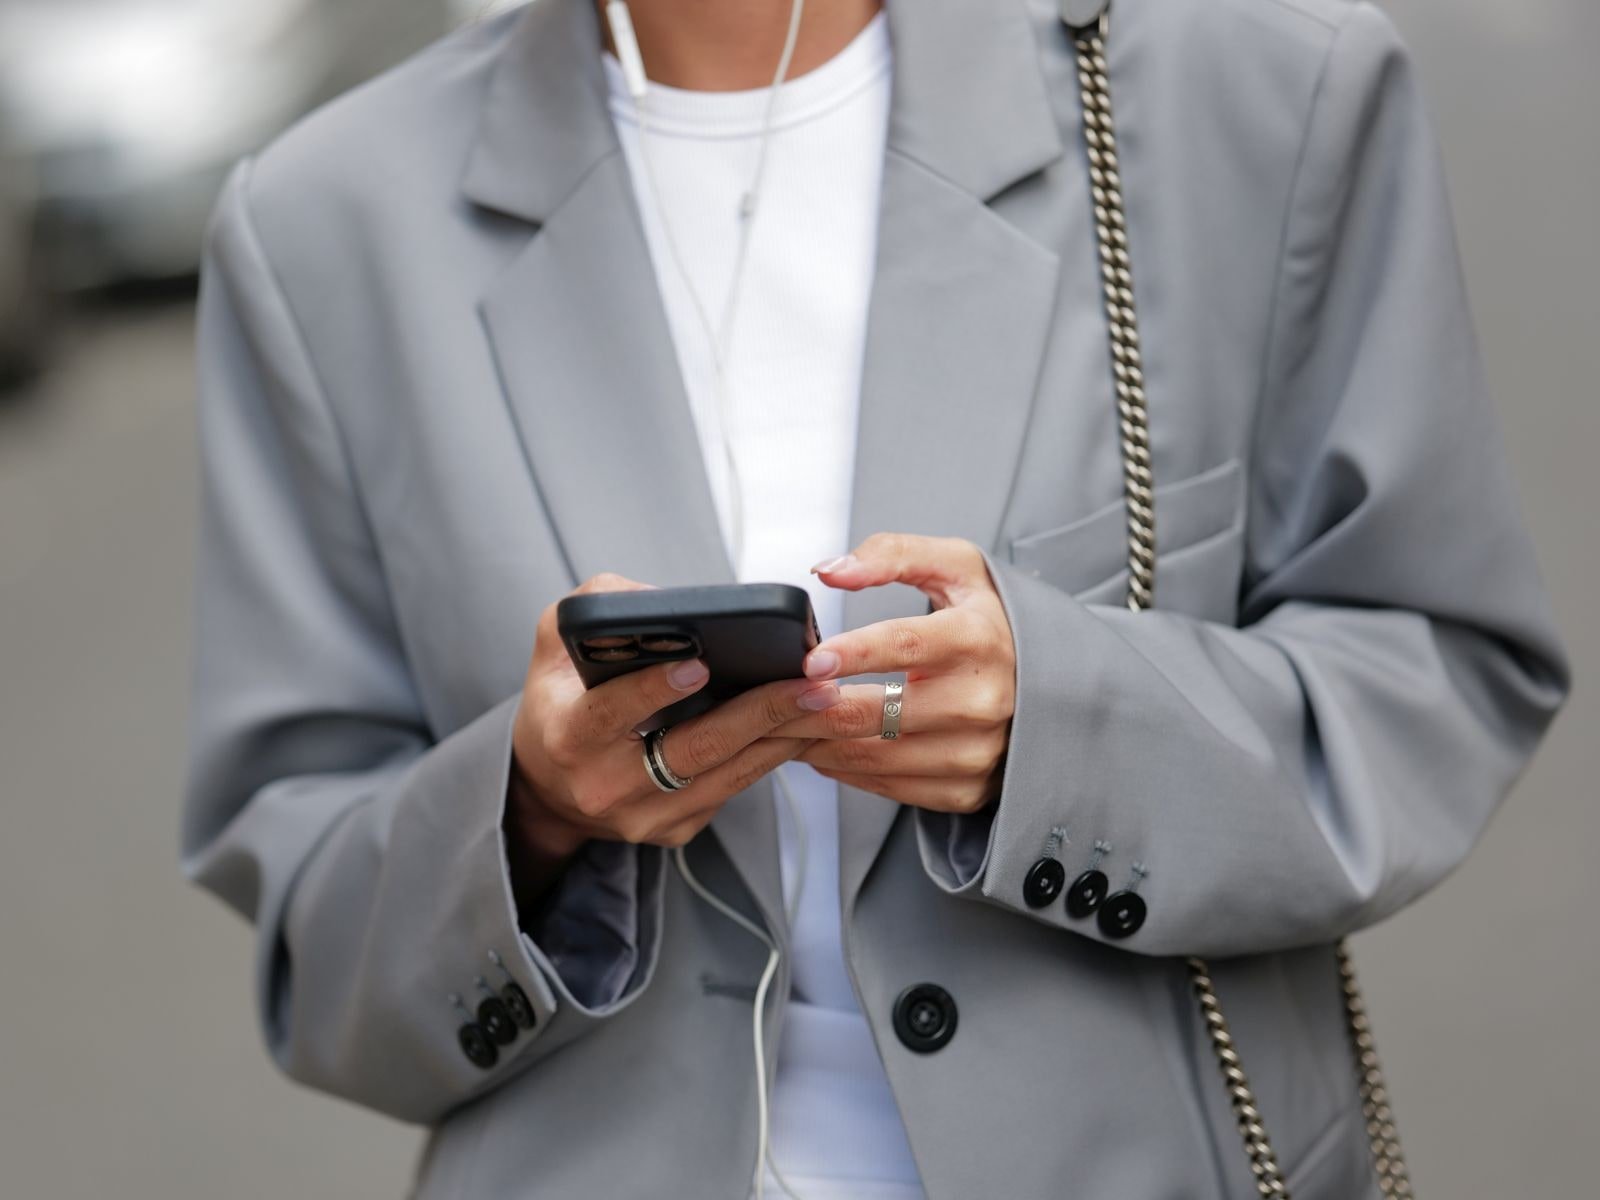 iPhone Cases to Buy Online - The Wom Fashion